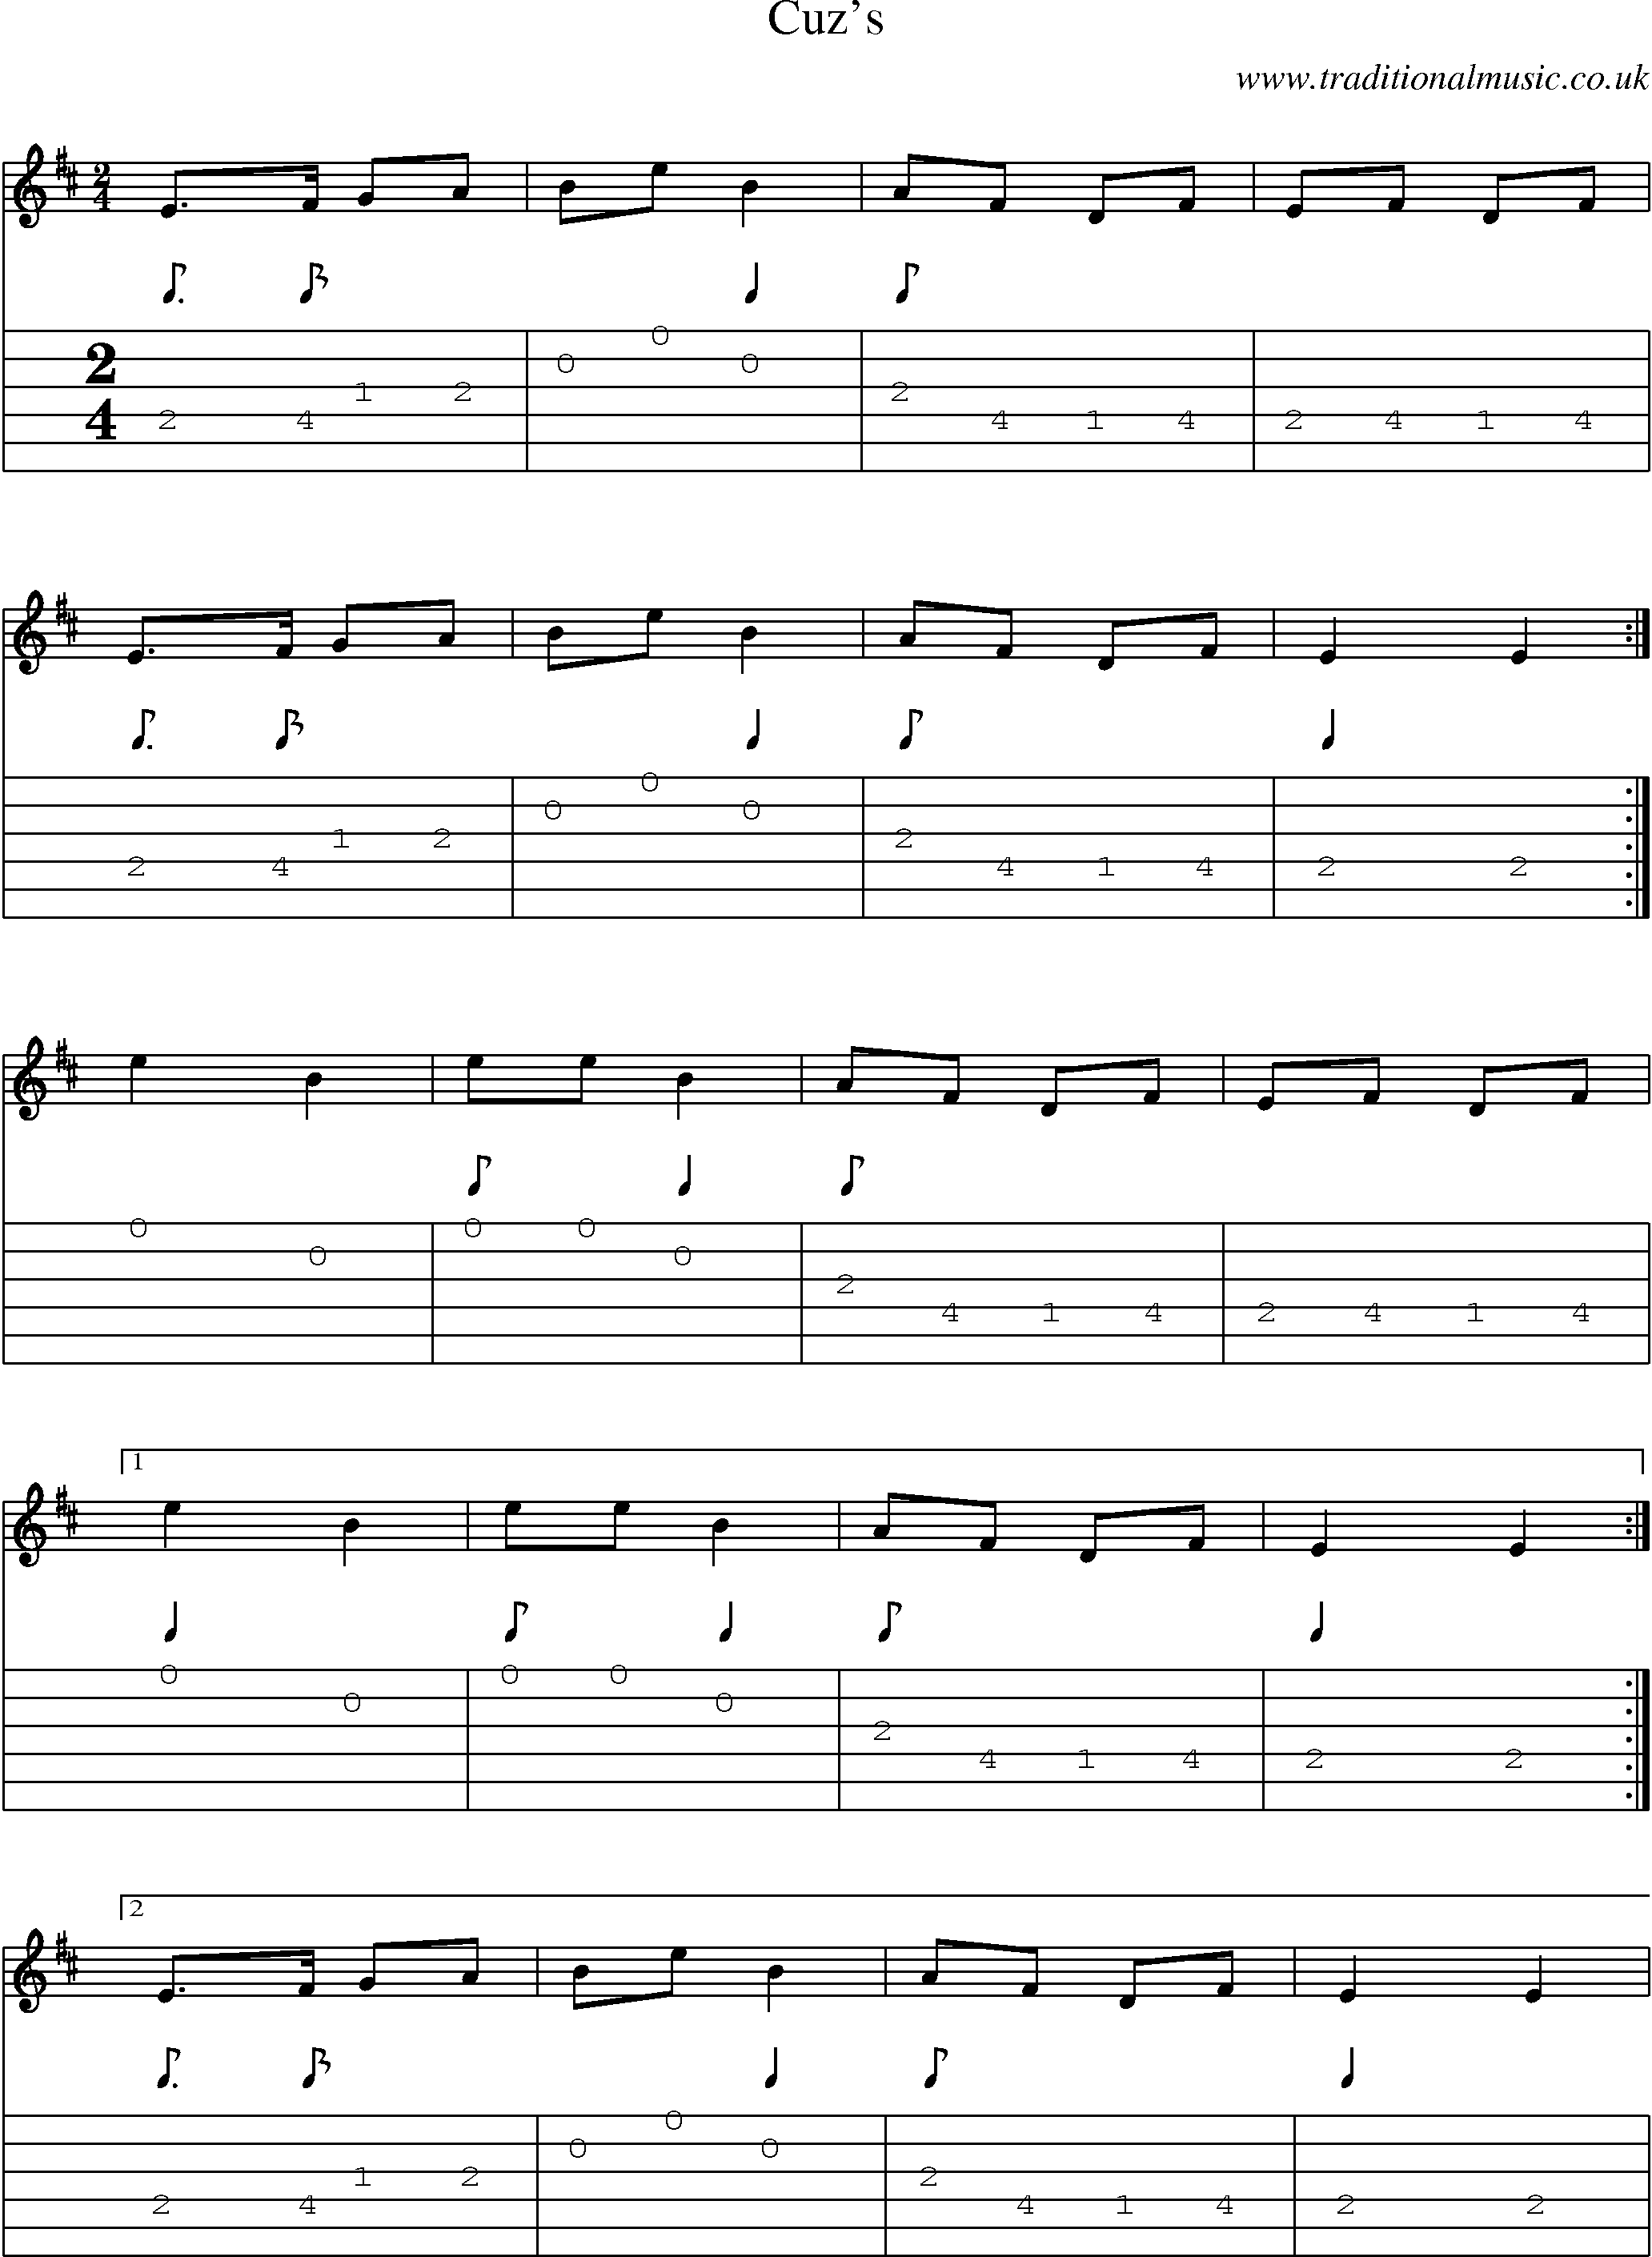 Music Score and Guitar Tabs for Cuzs